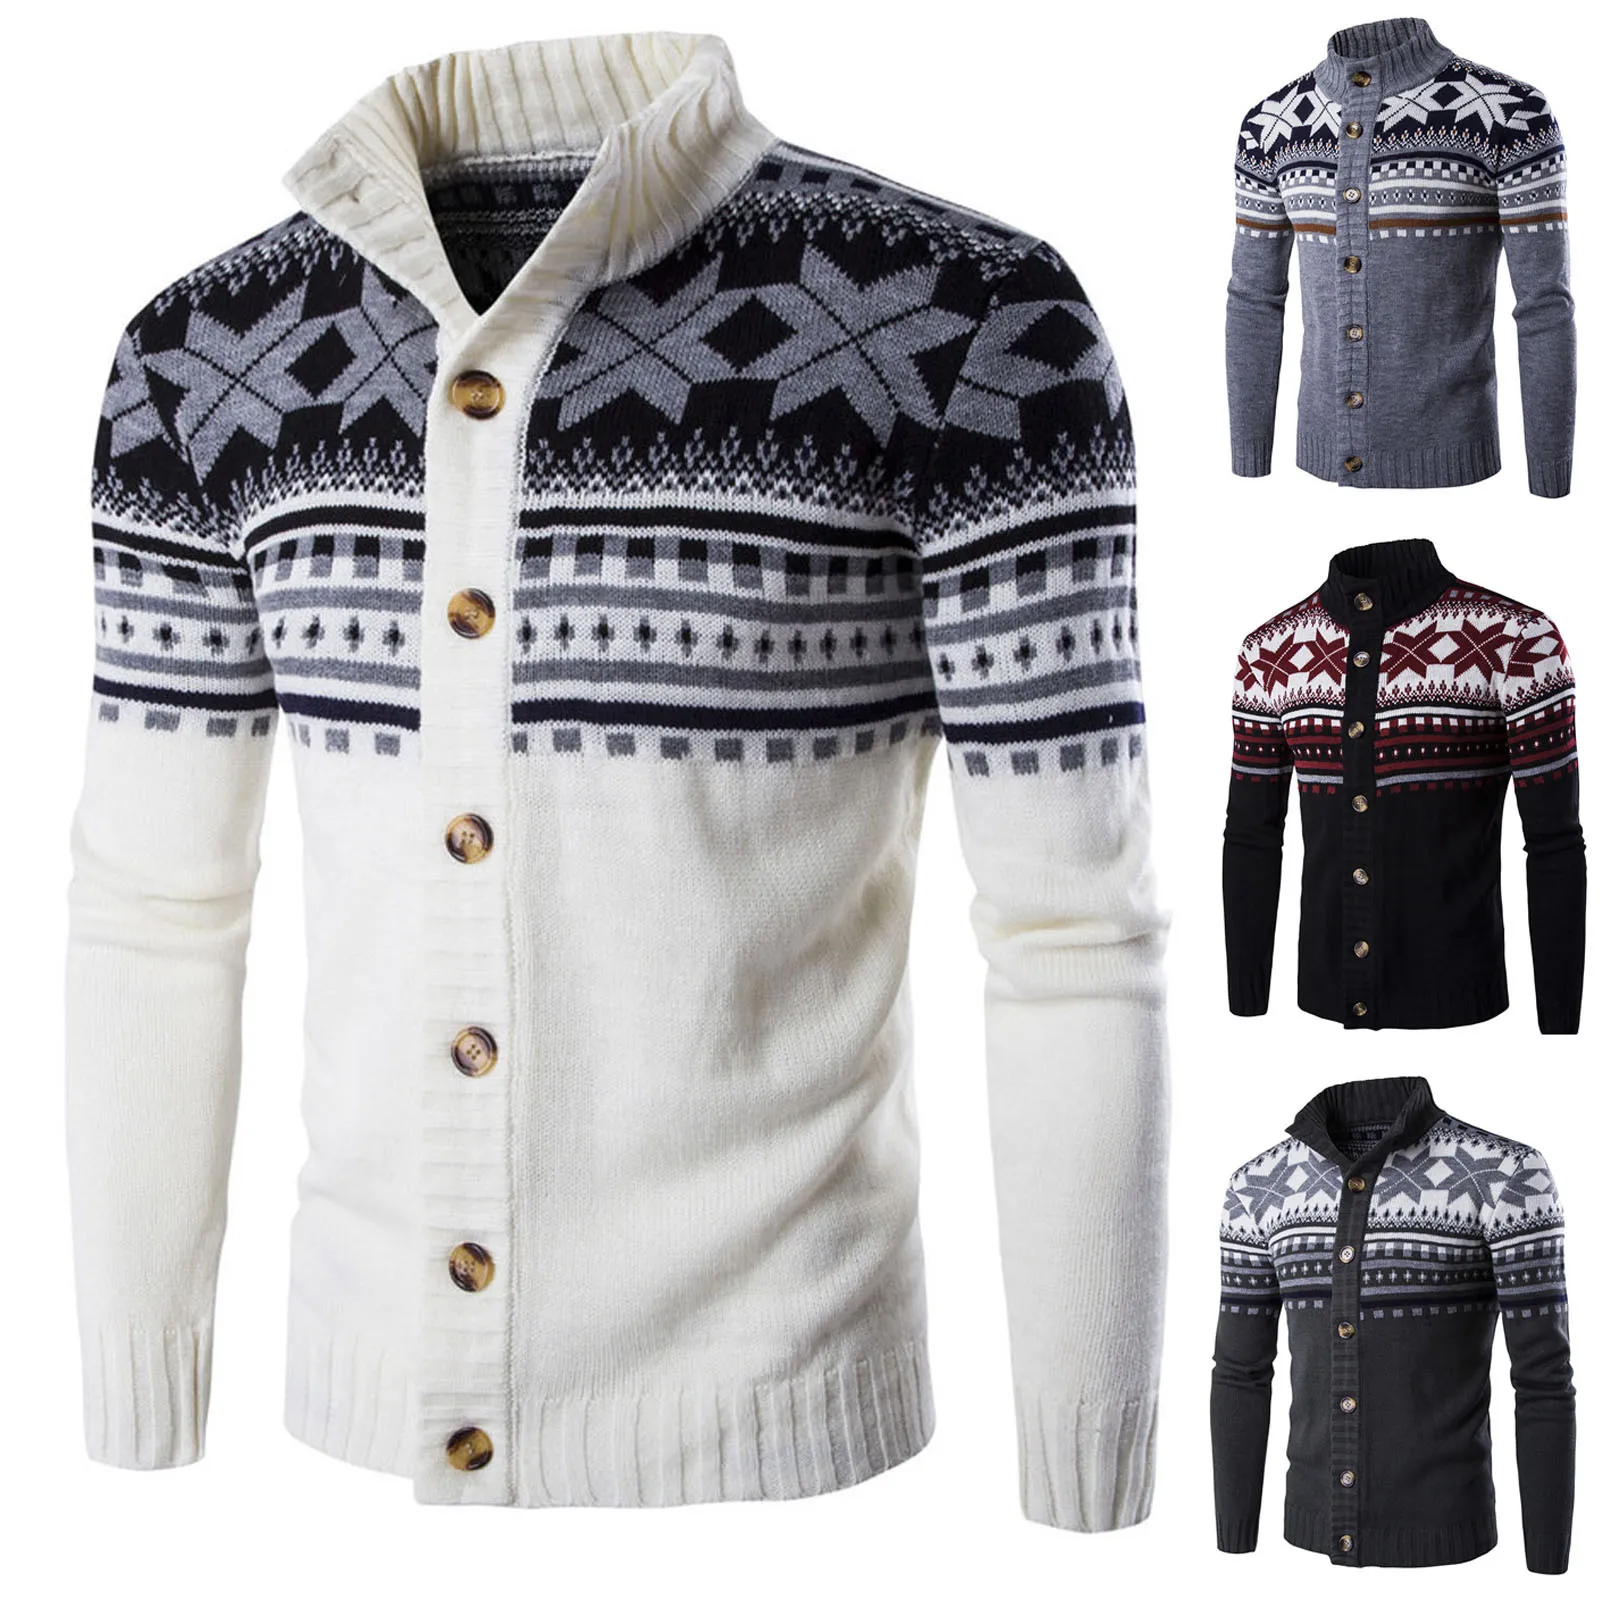 

Fashion Men's Stand Collar Long Sleeve Single-breasted Knitted Cardigan Knitwear Sweater Casual Splicing Jacket Coat Outwear#g3